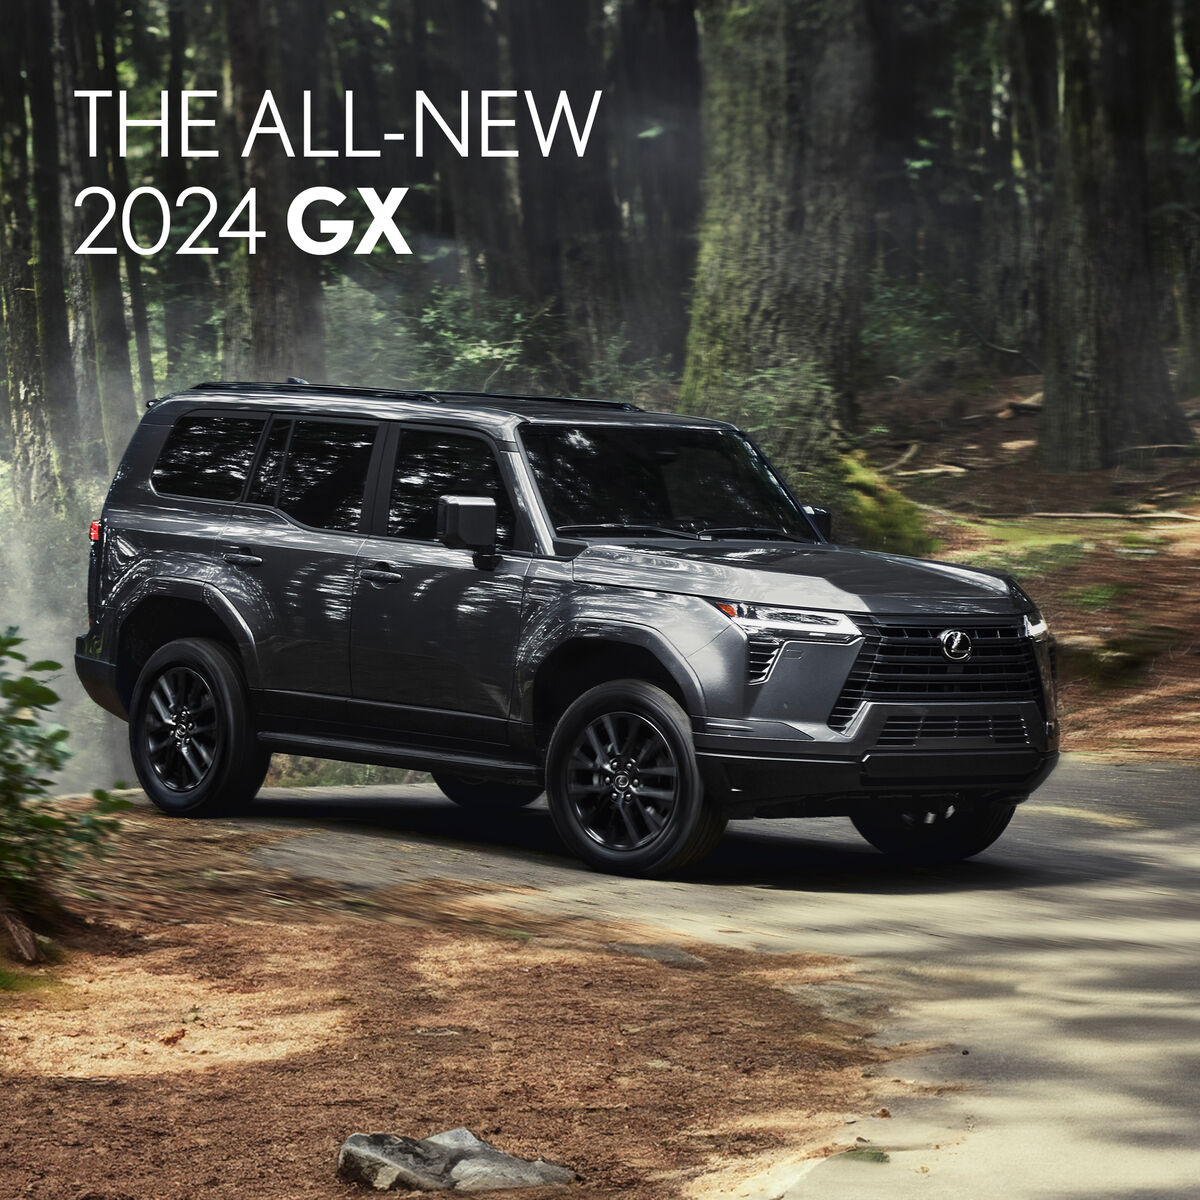 The All-New 2024 GX